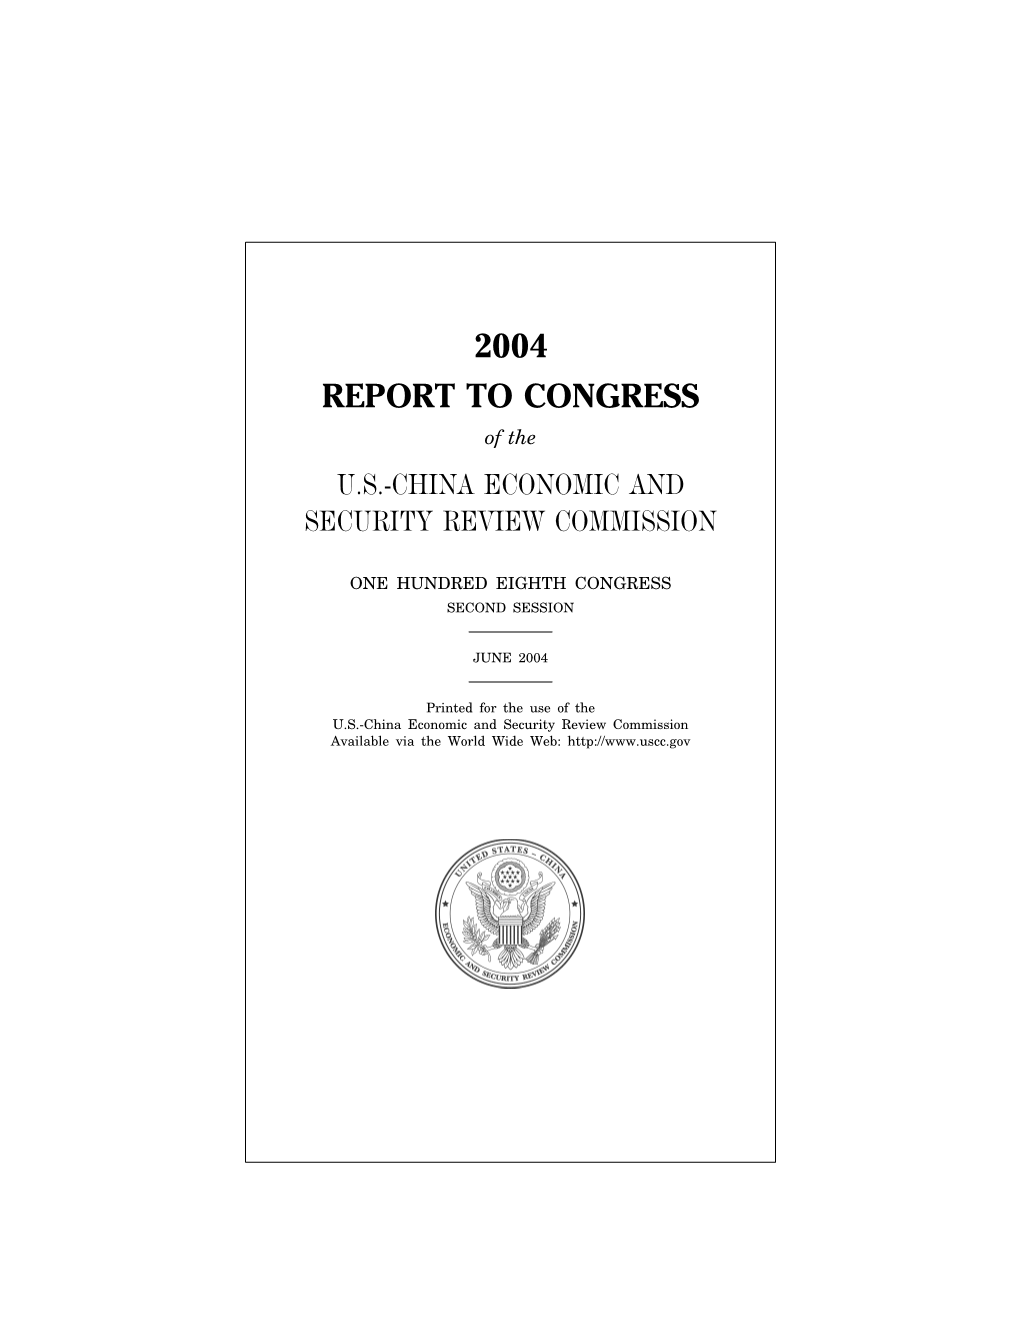 2004 REPORT to CONGRESS of the U.S.-CHINA ECONOMIC and SECURITY REVIEW COMMISSION